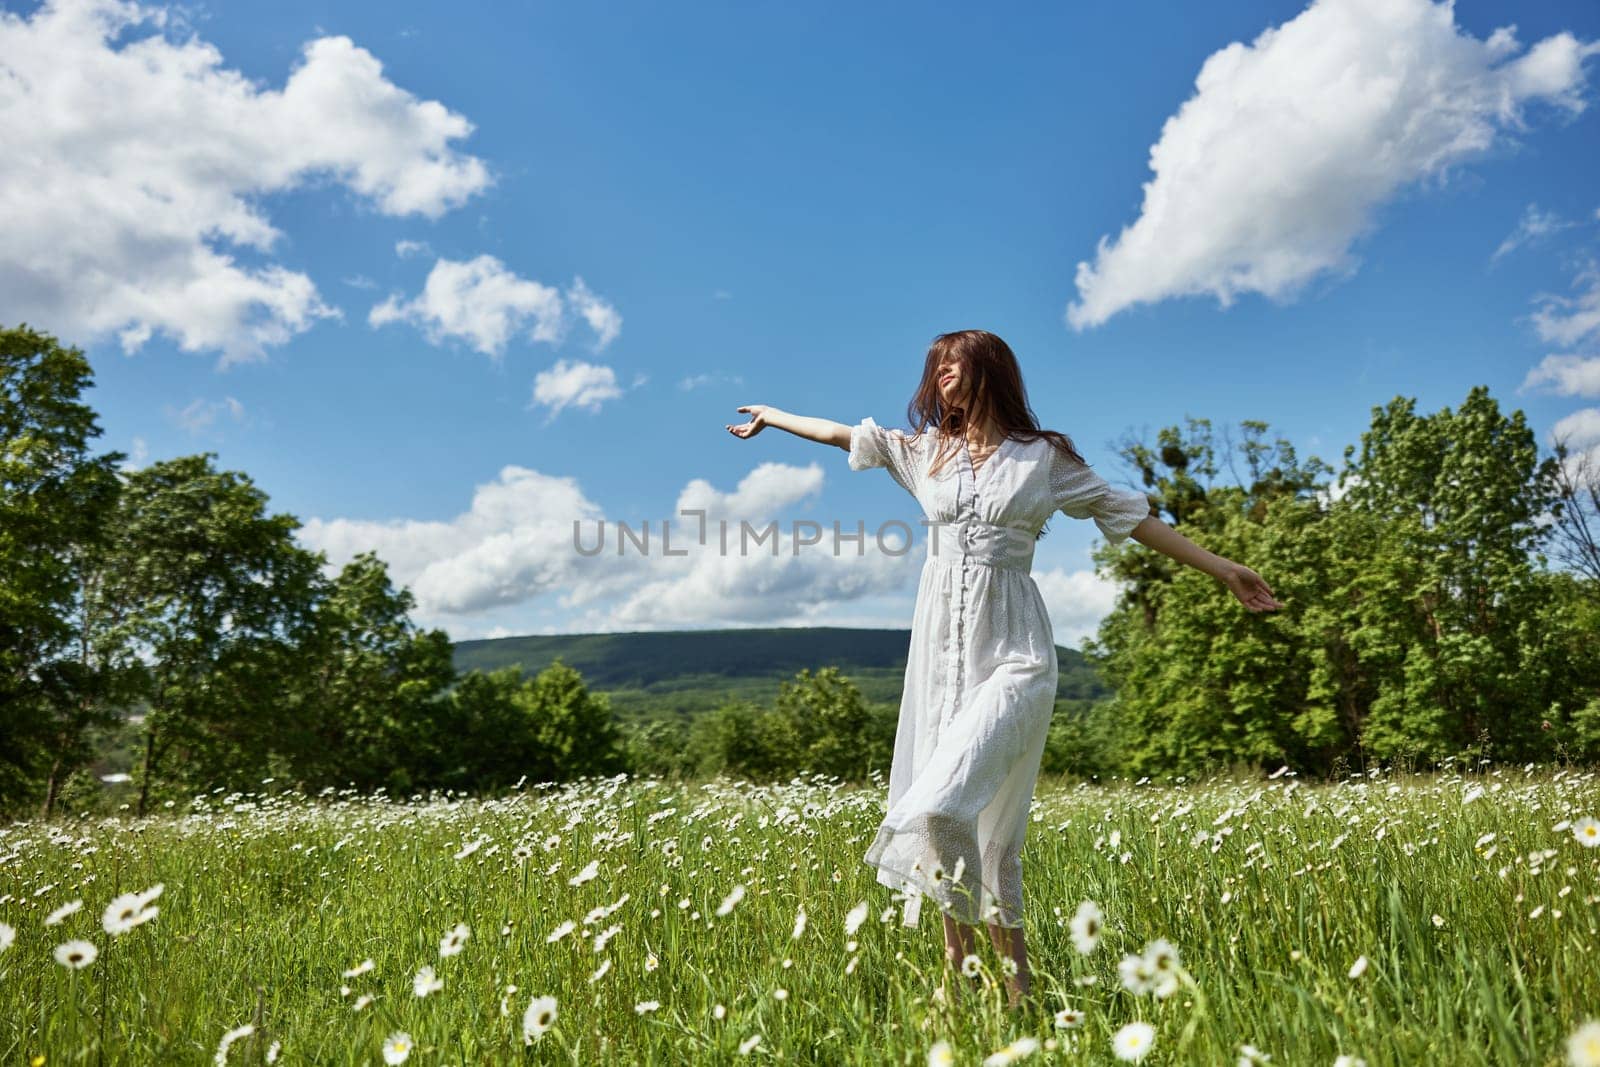 a woman in a long light dress with hair covering her face in a chamomile field against a blue sky with clouds by Vichizh